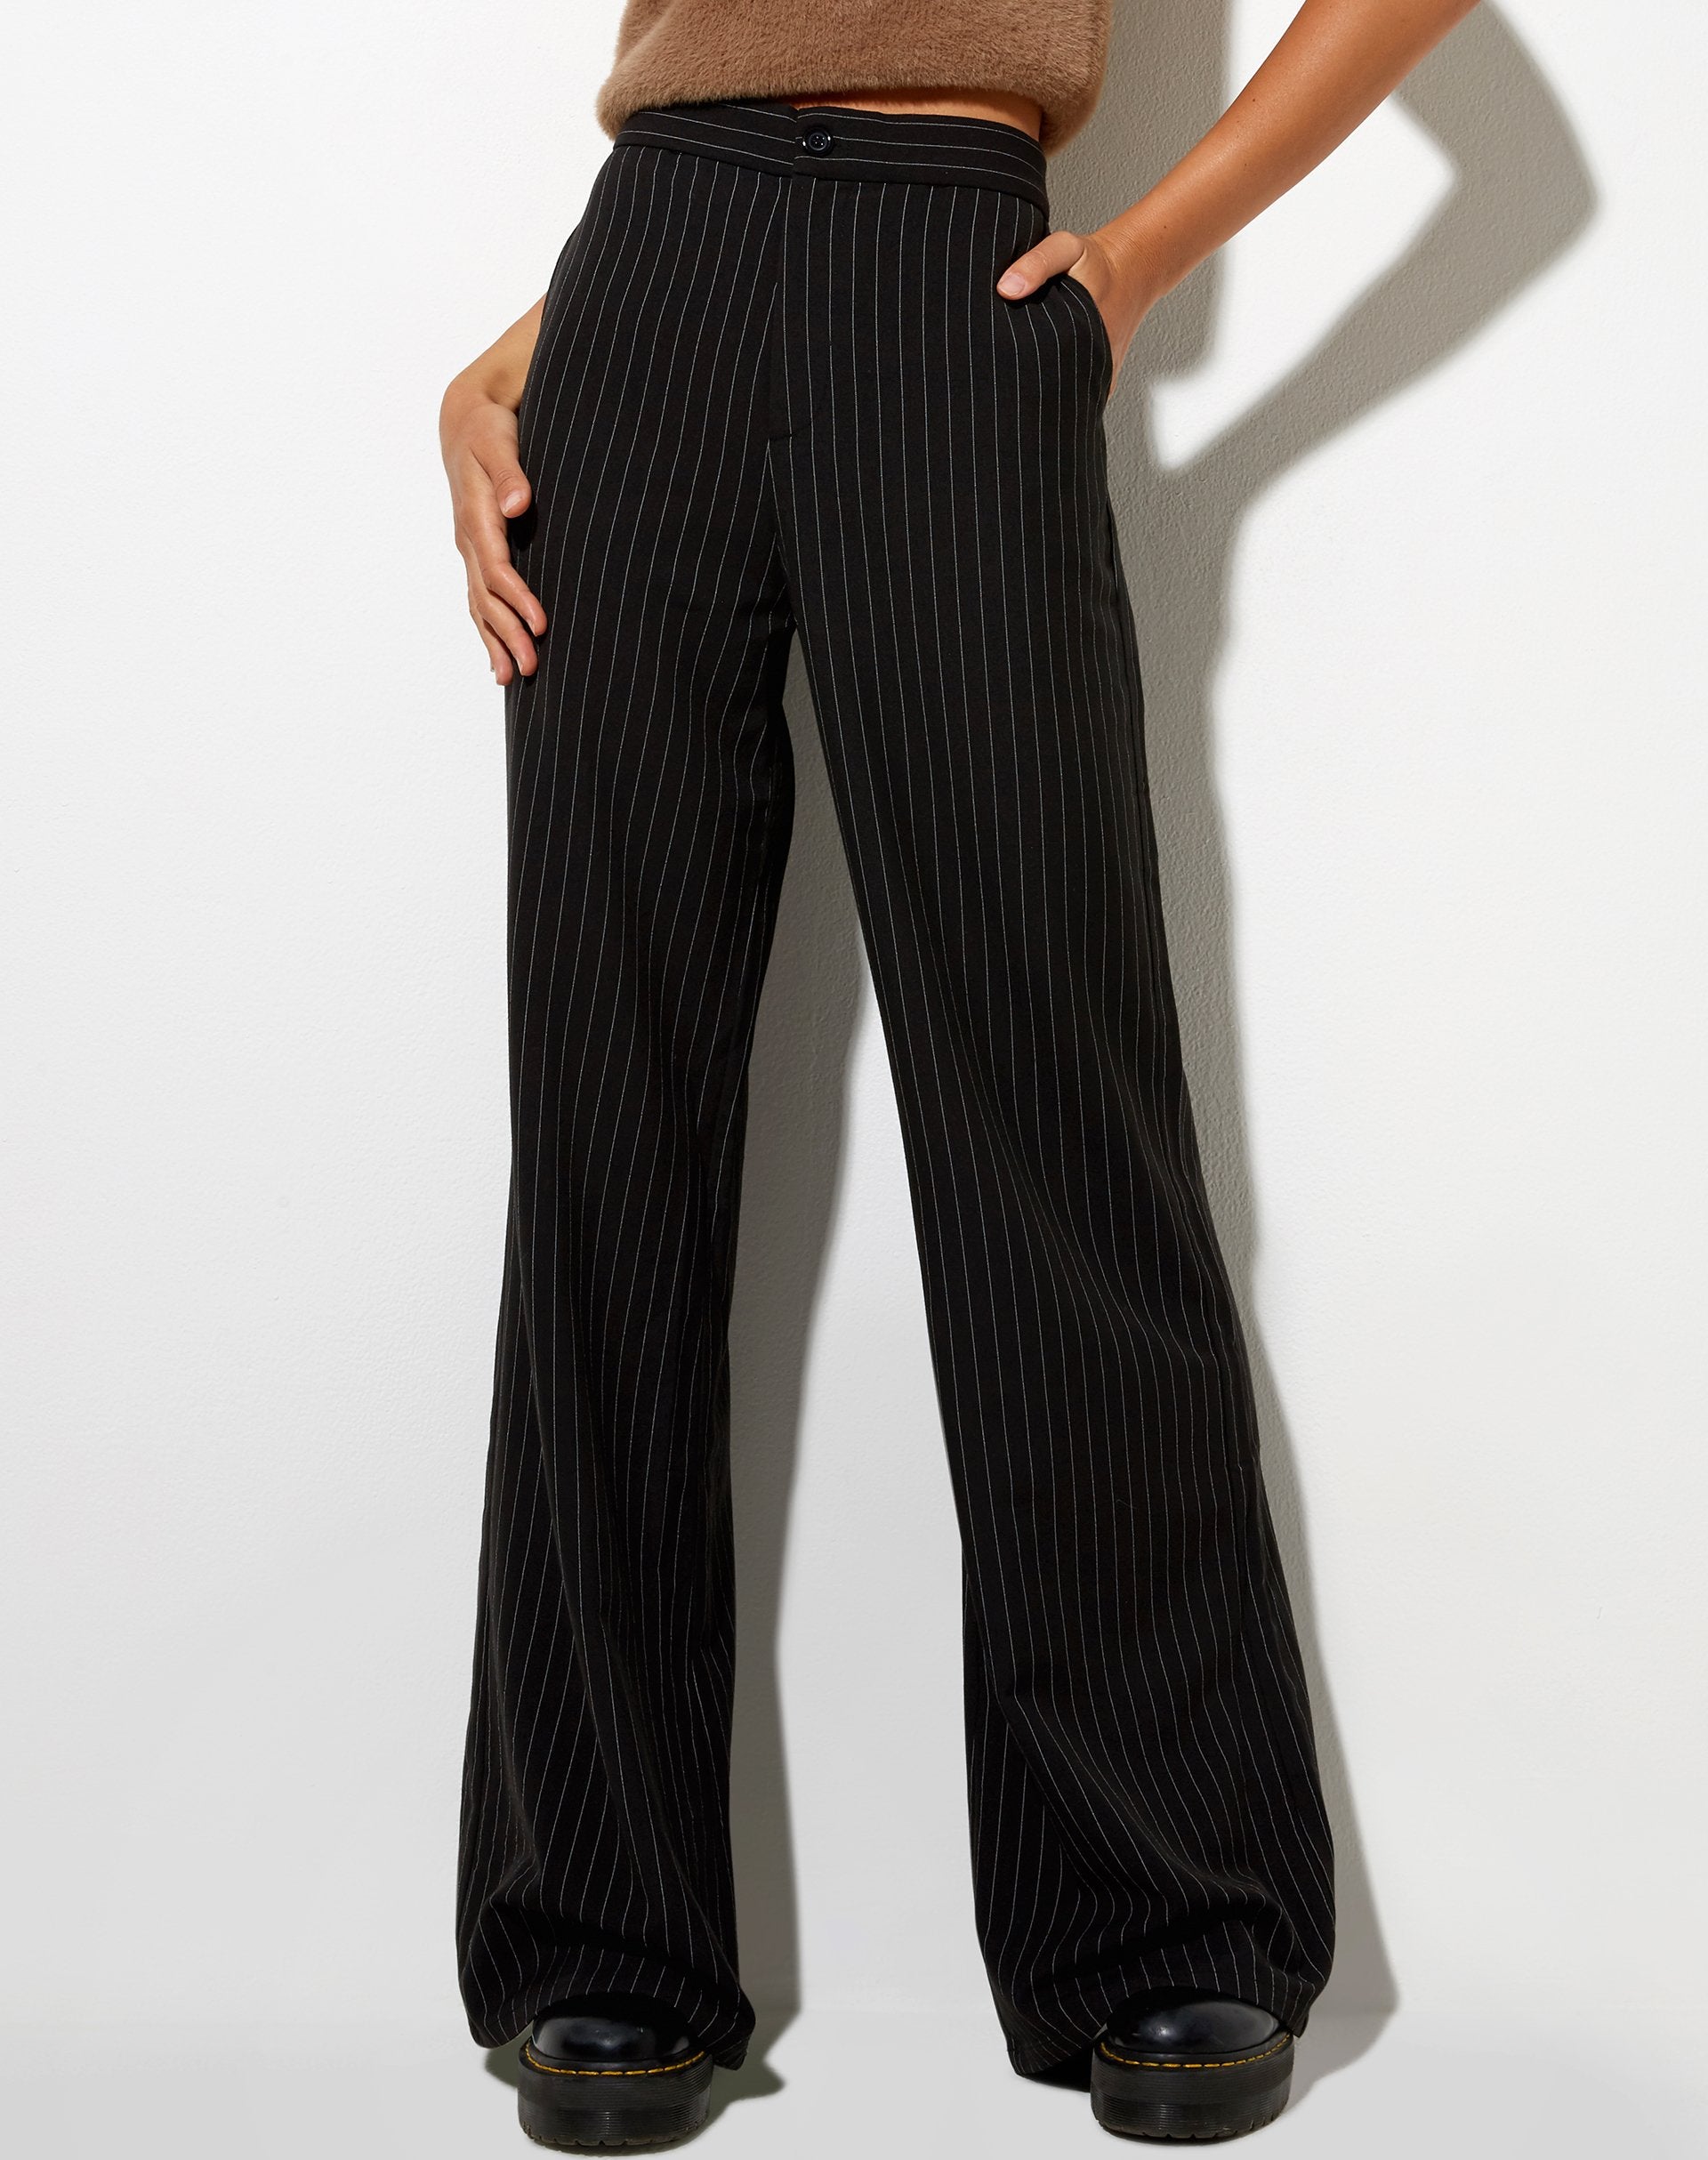 Image of Ivo Flare Trouser in Pinstripe Black